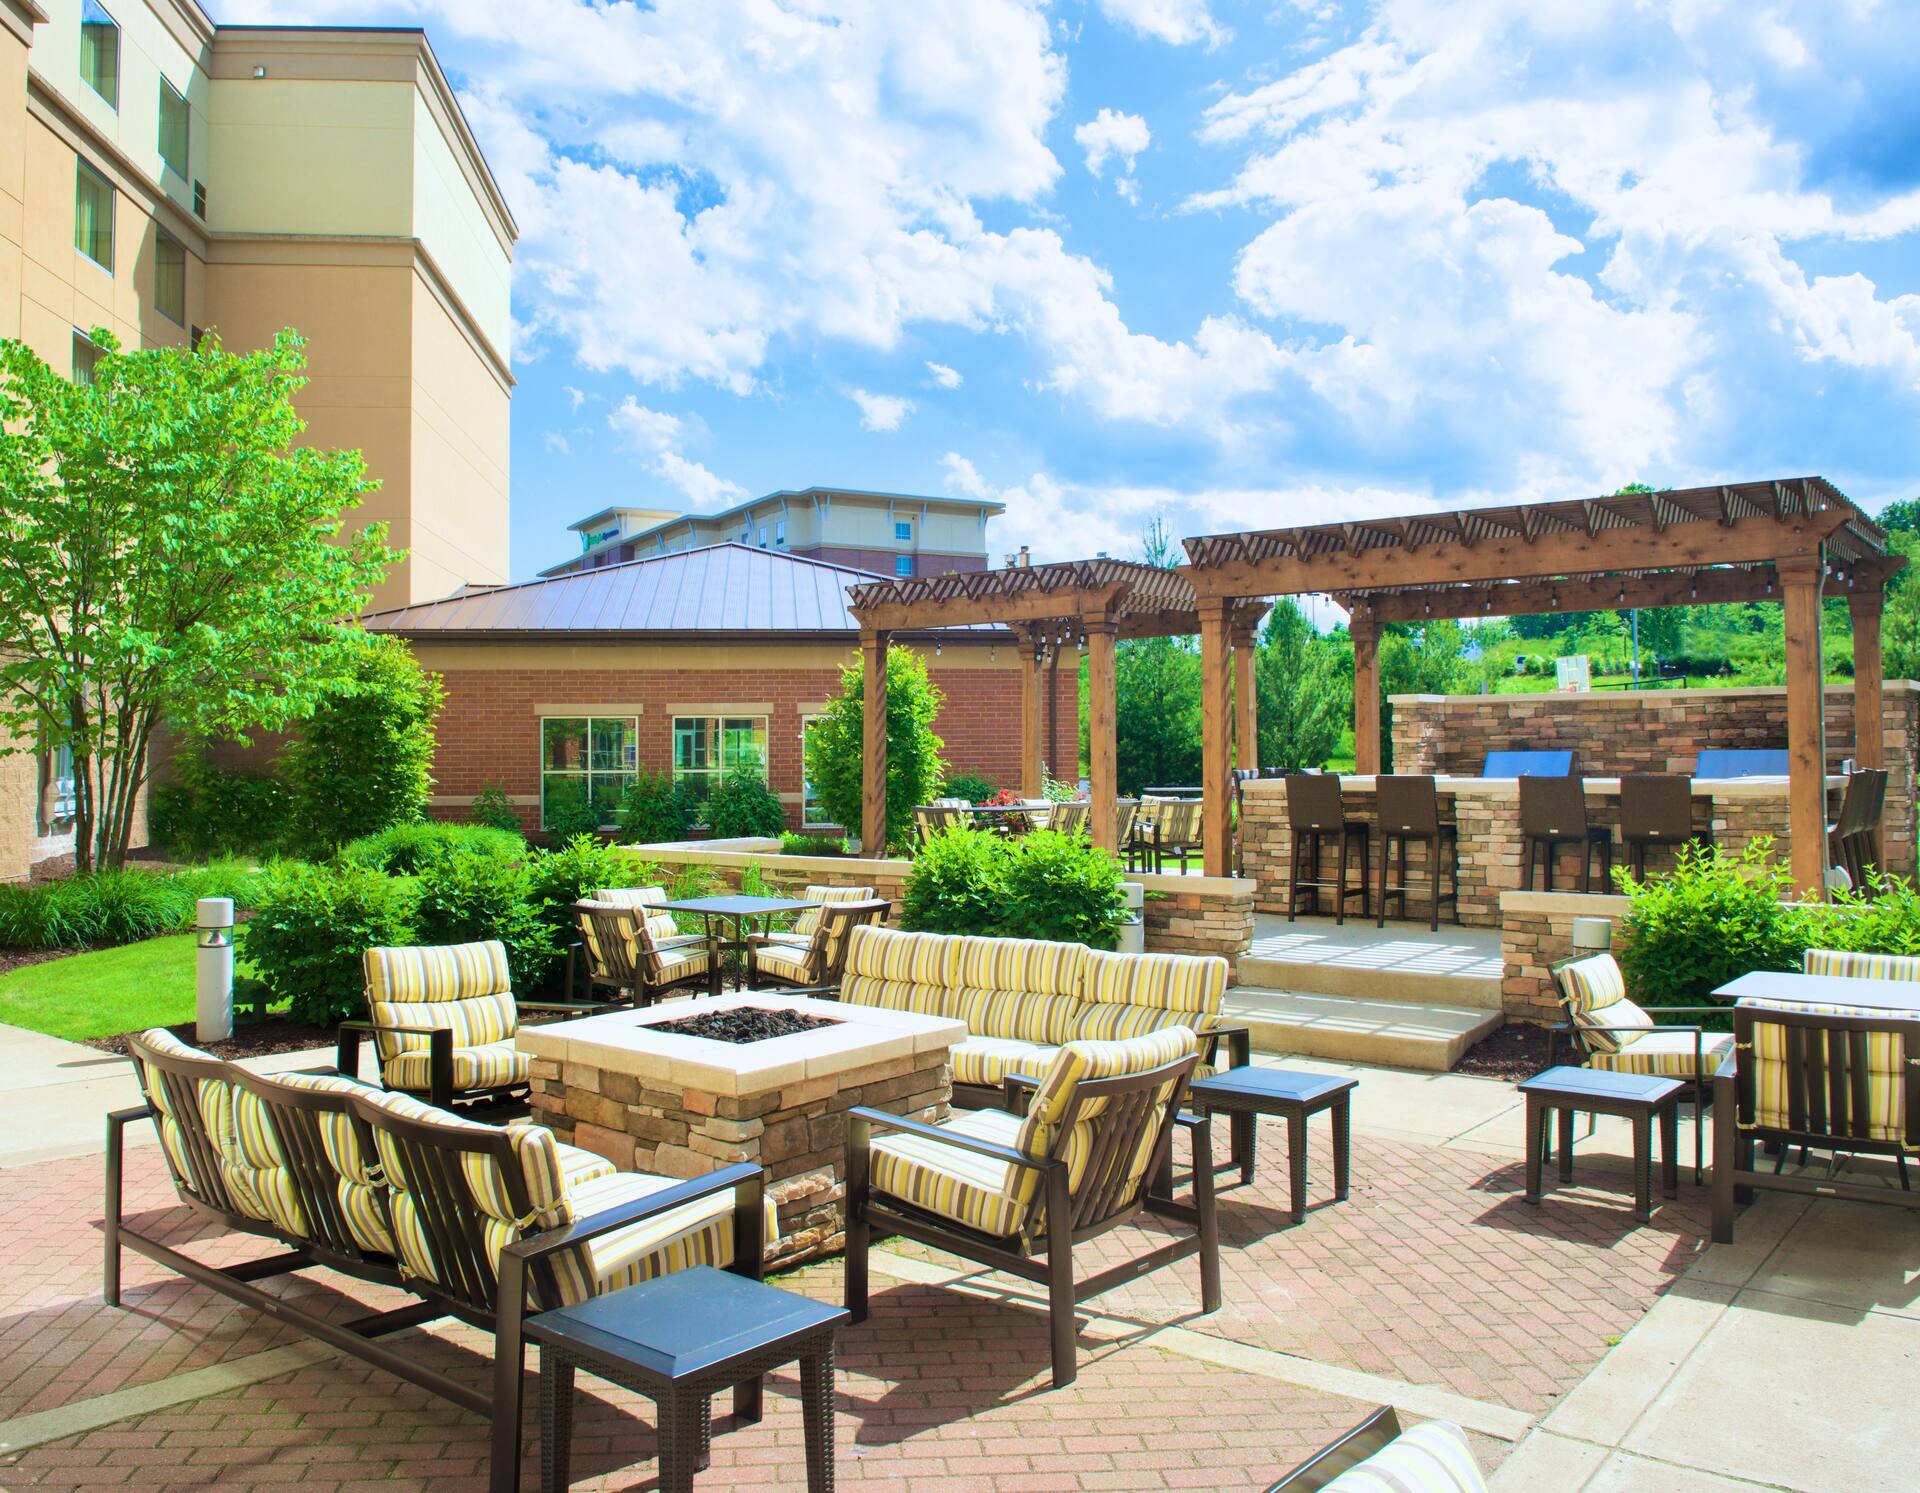 Photo of Homewood Suites by Hilton Pittsburgh-Southpointe, Canonsburg, PA